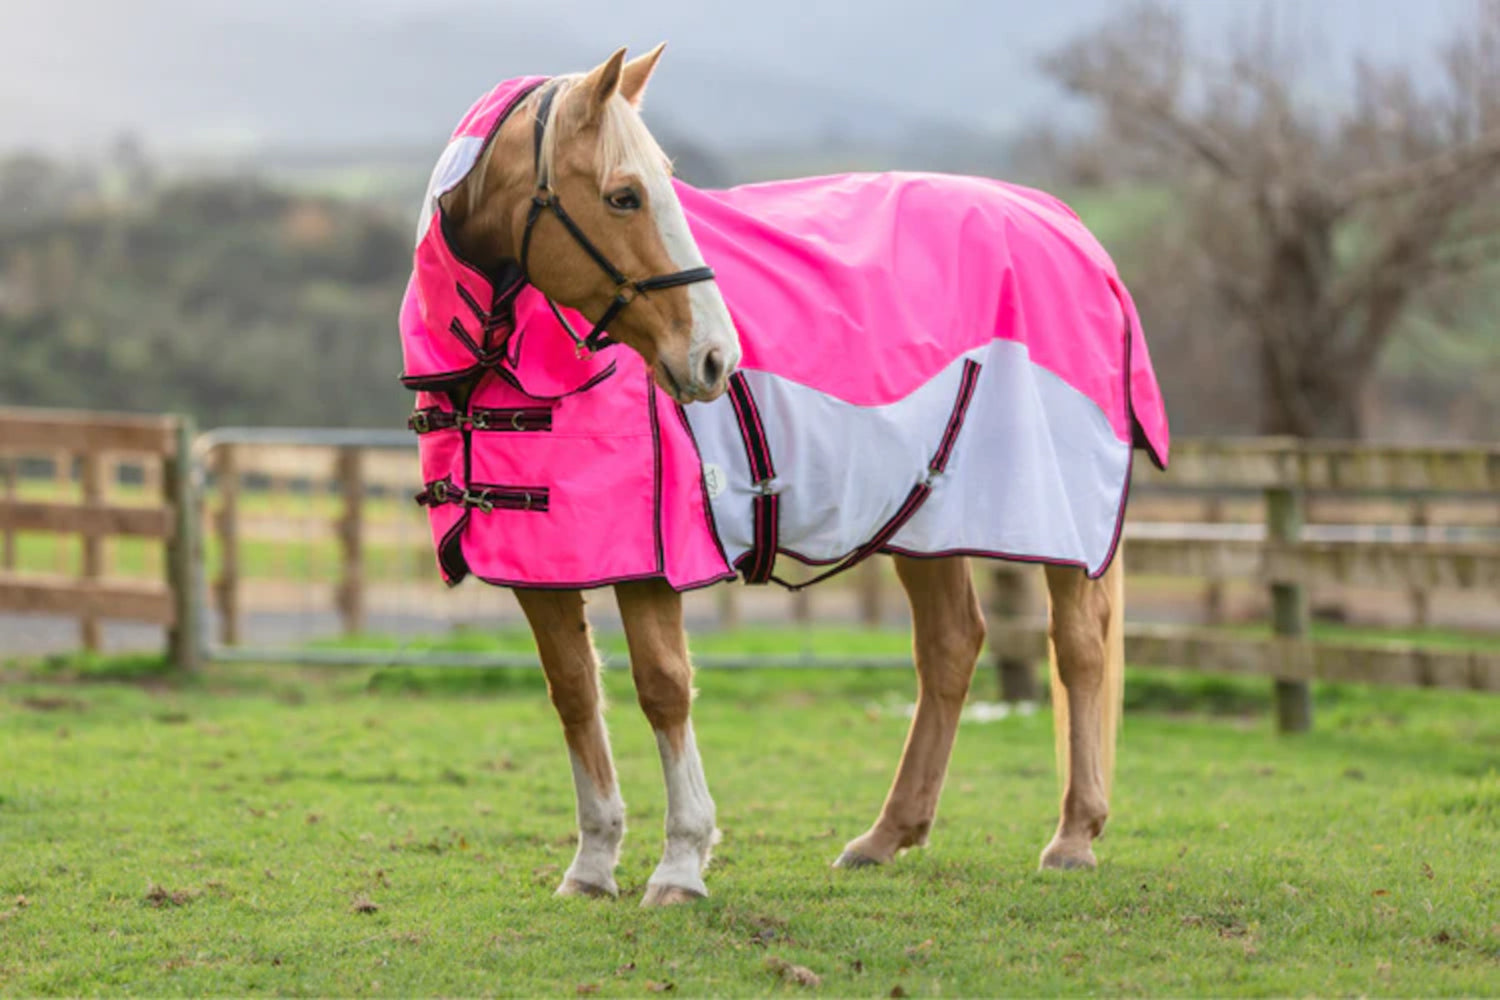 How to safely clean and wash your horse covers